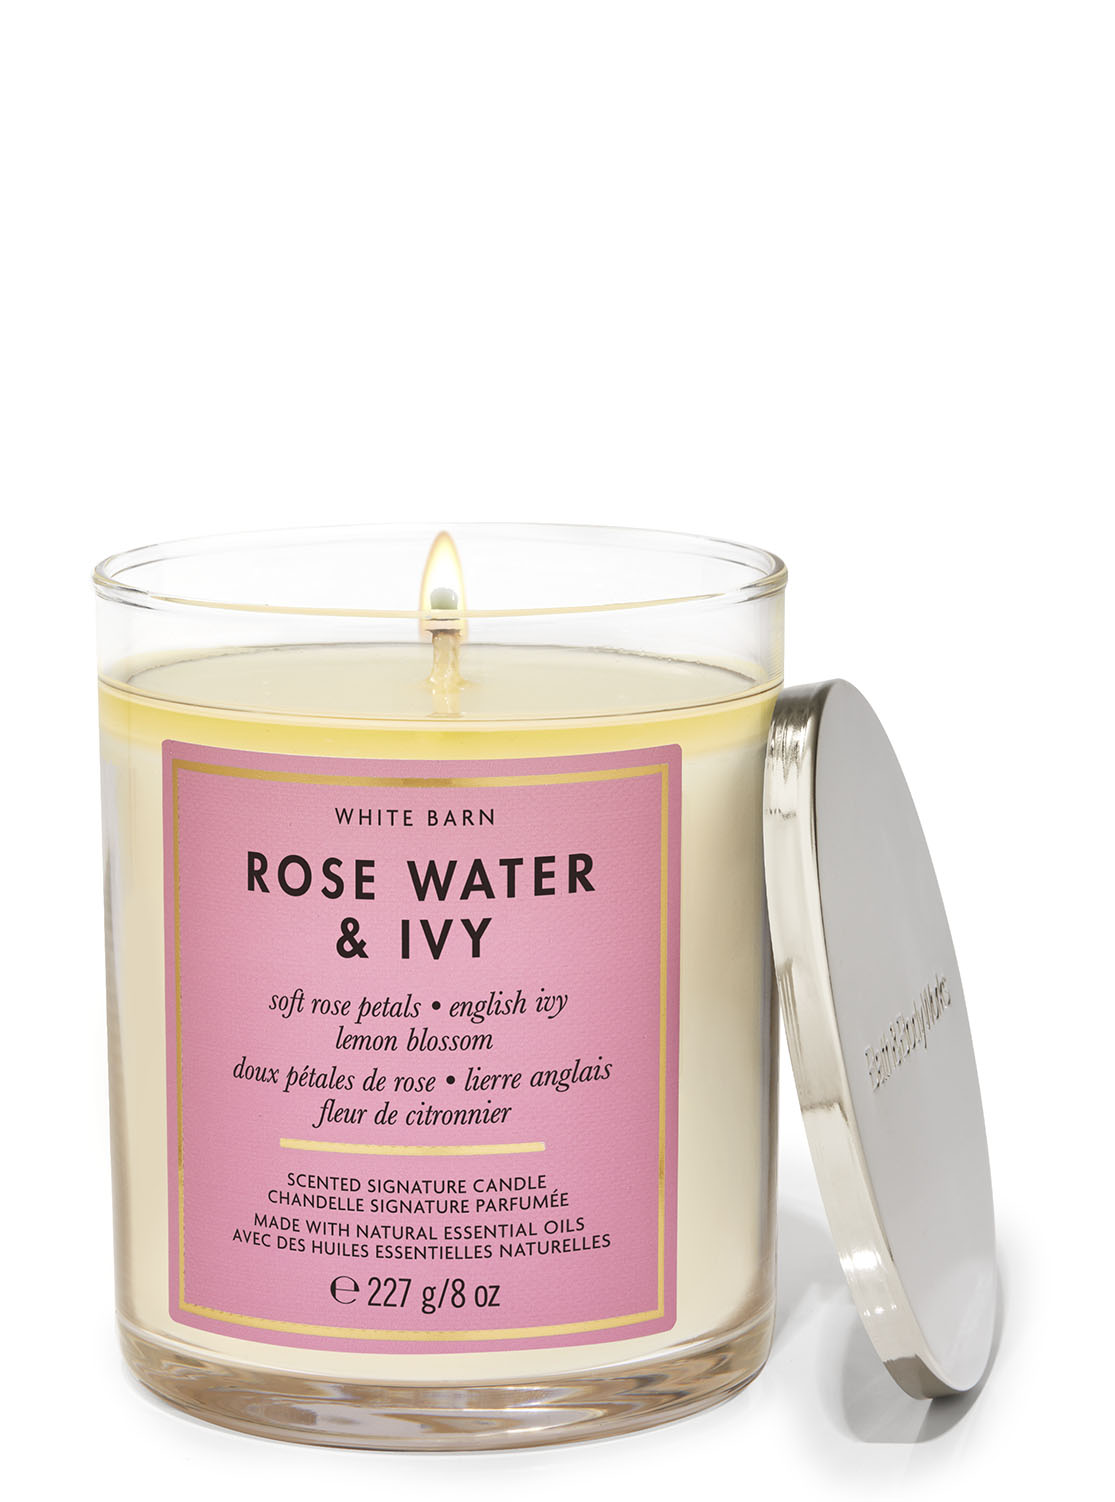 Rose Water & Ivy Signature Single Wick Candle | Bath and Body Works